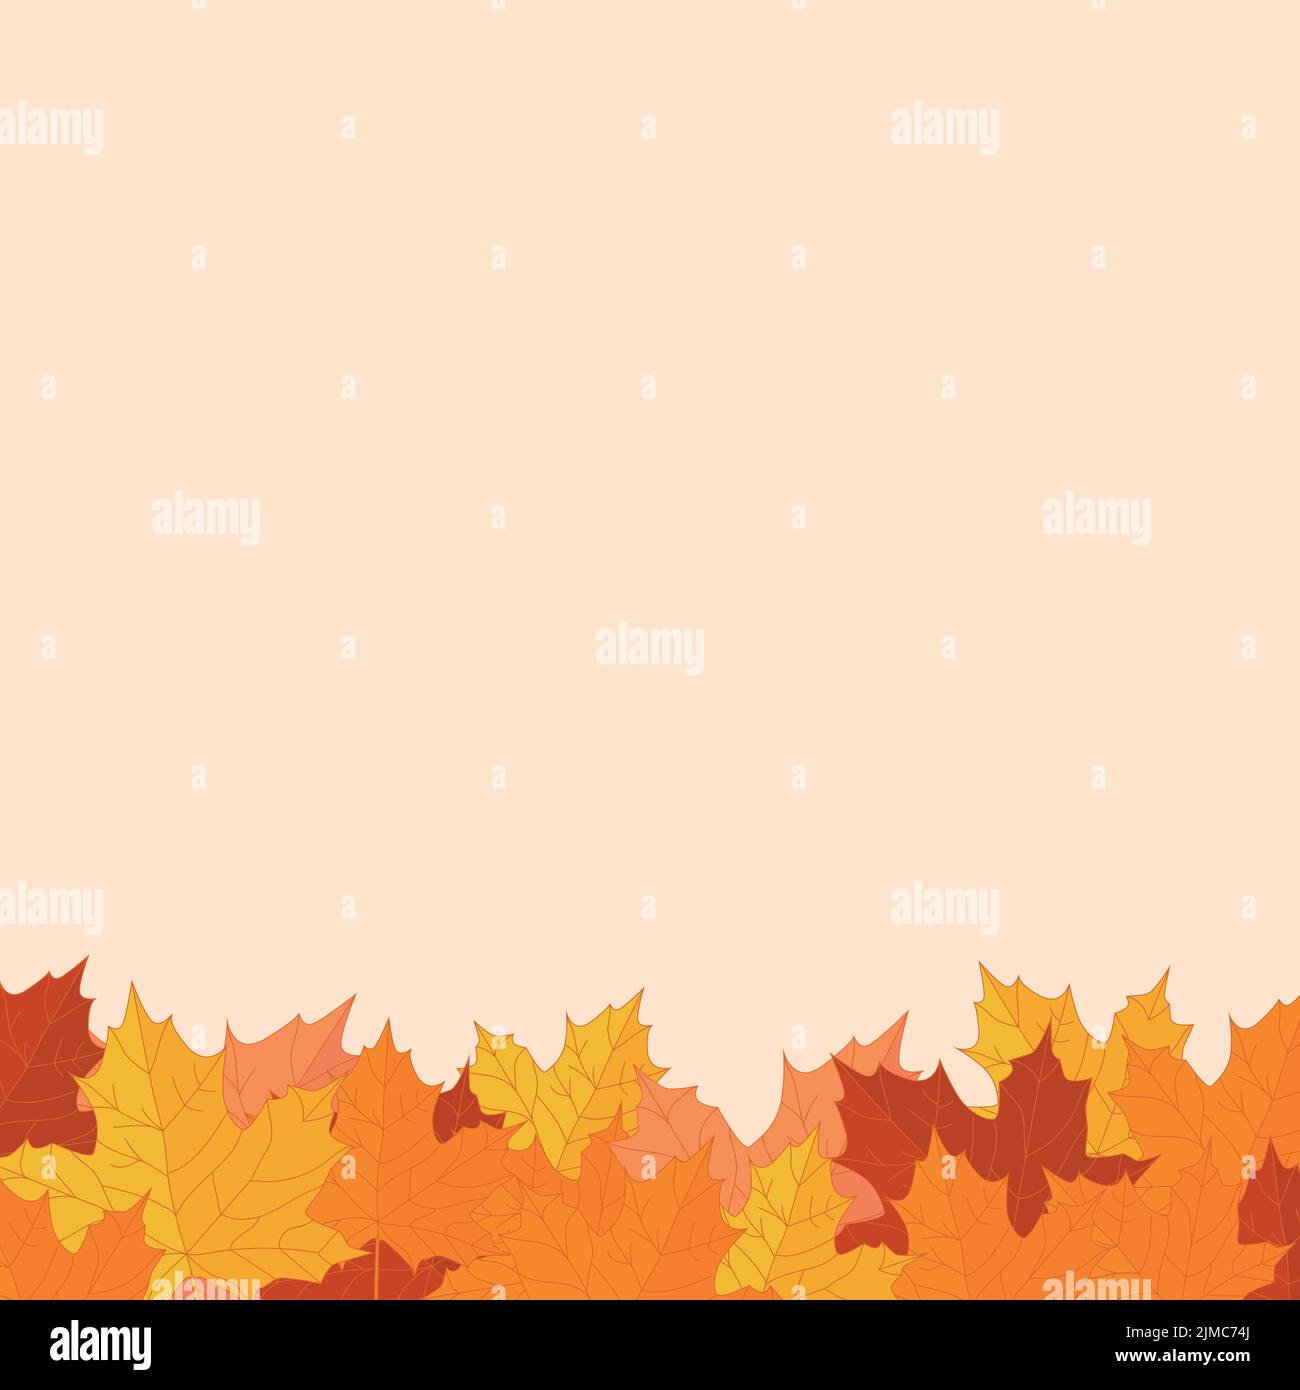 Natural background for autumn or fall concept, fallen leaves in warm colors, red, orange, and yellow. Minimal seasonal design with copy space. Stock Vector